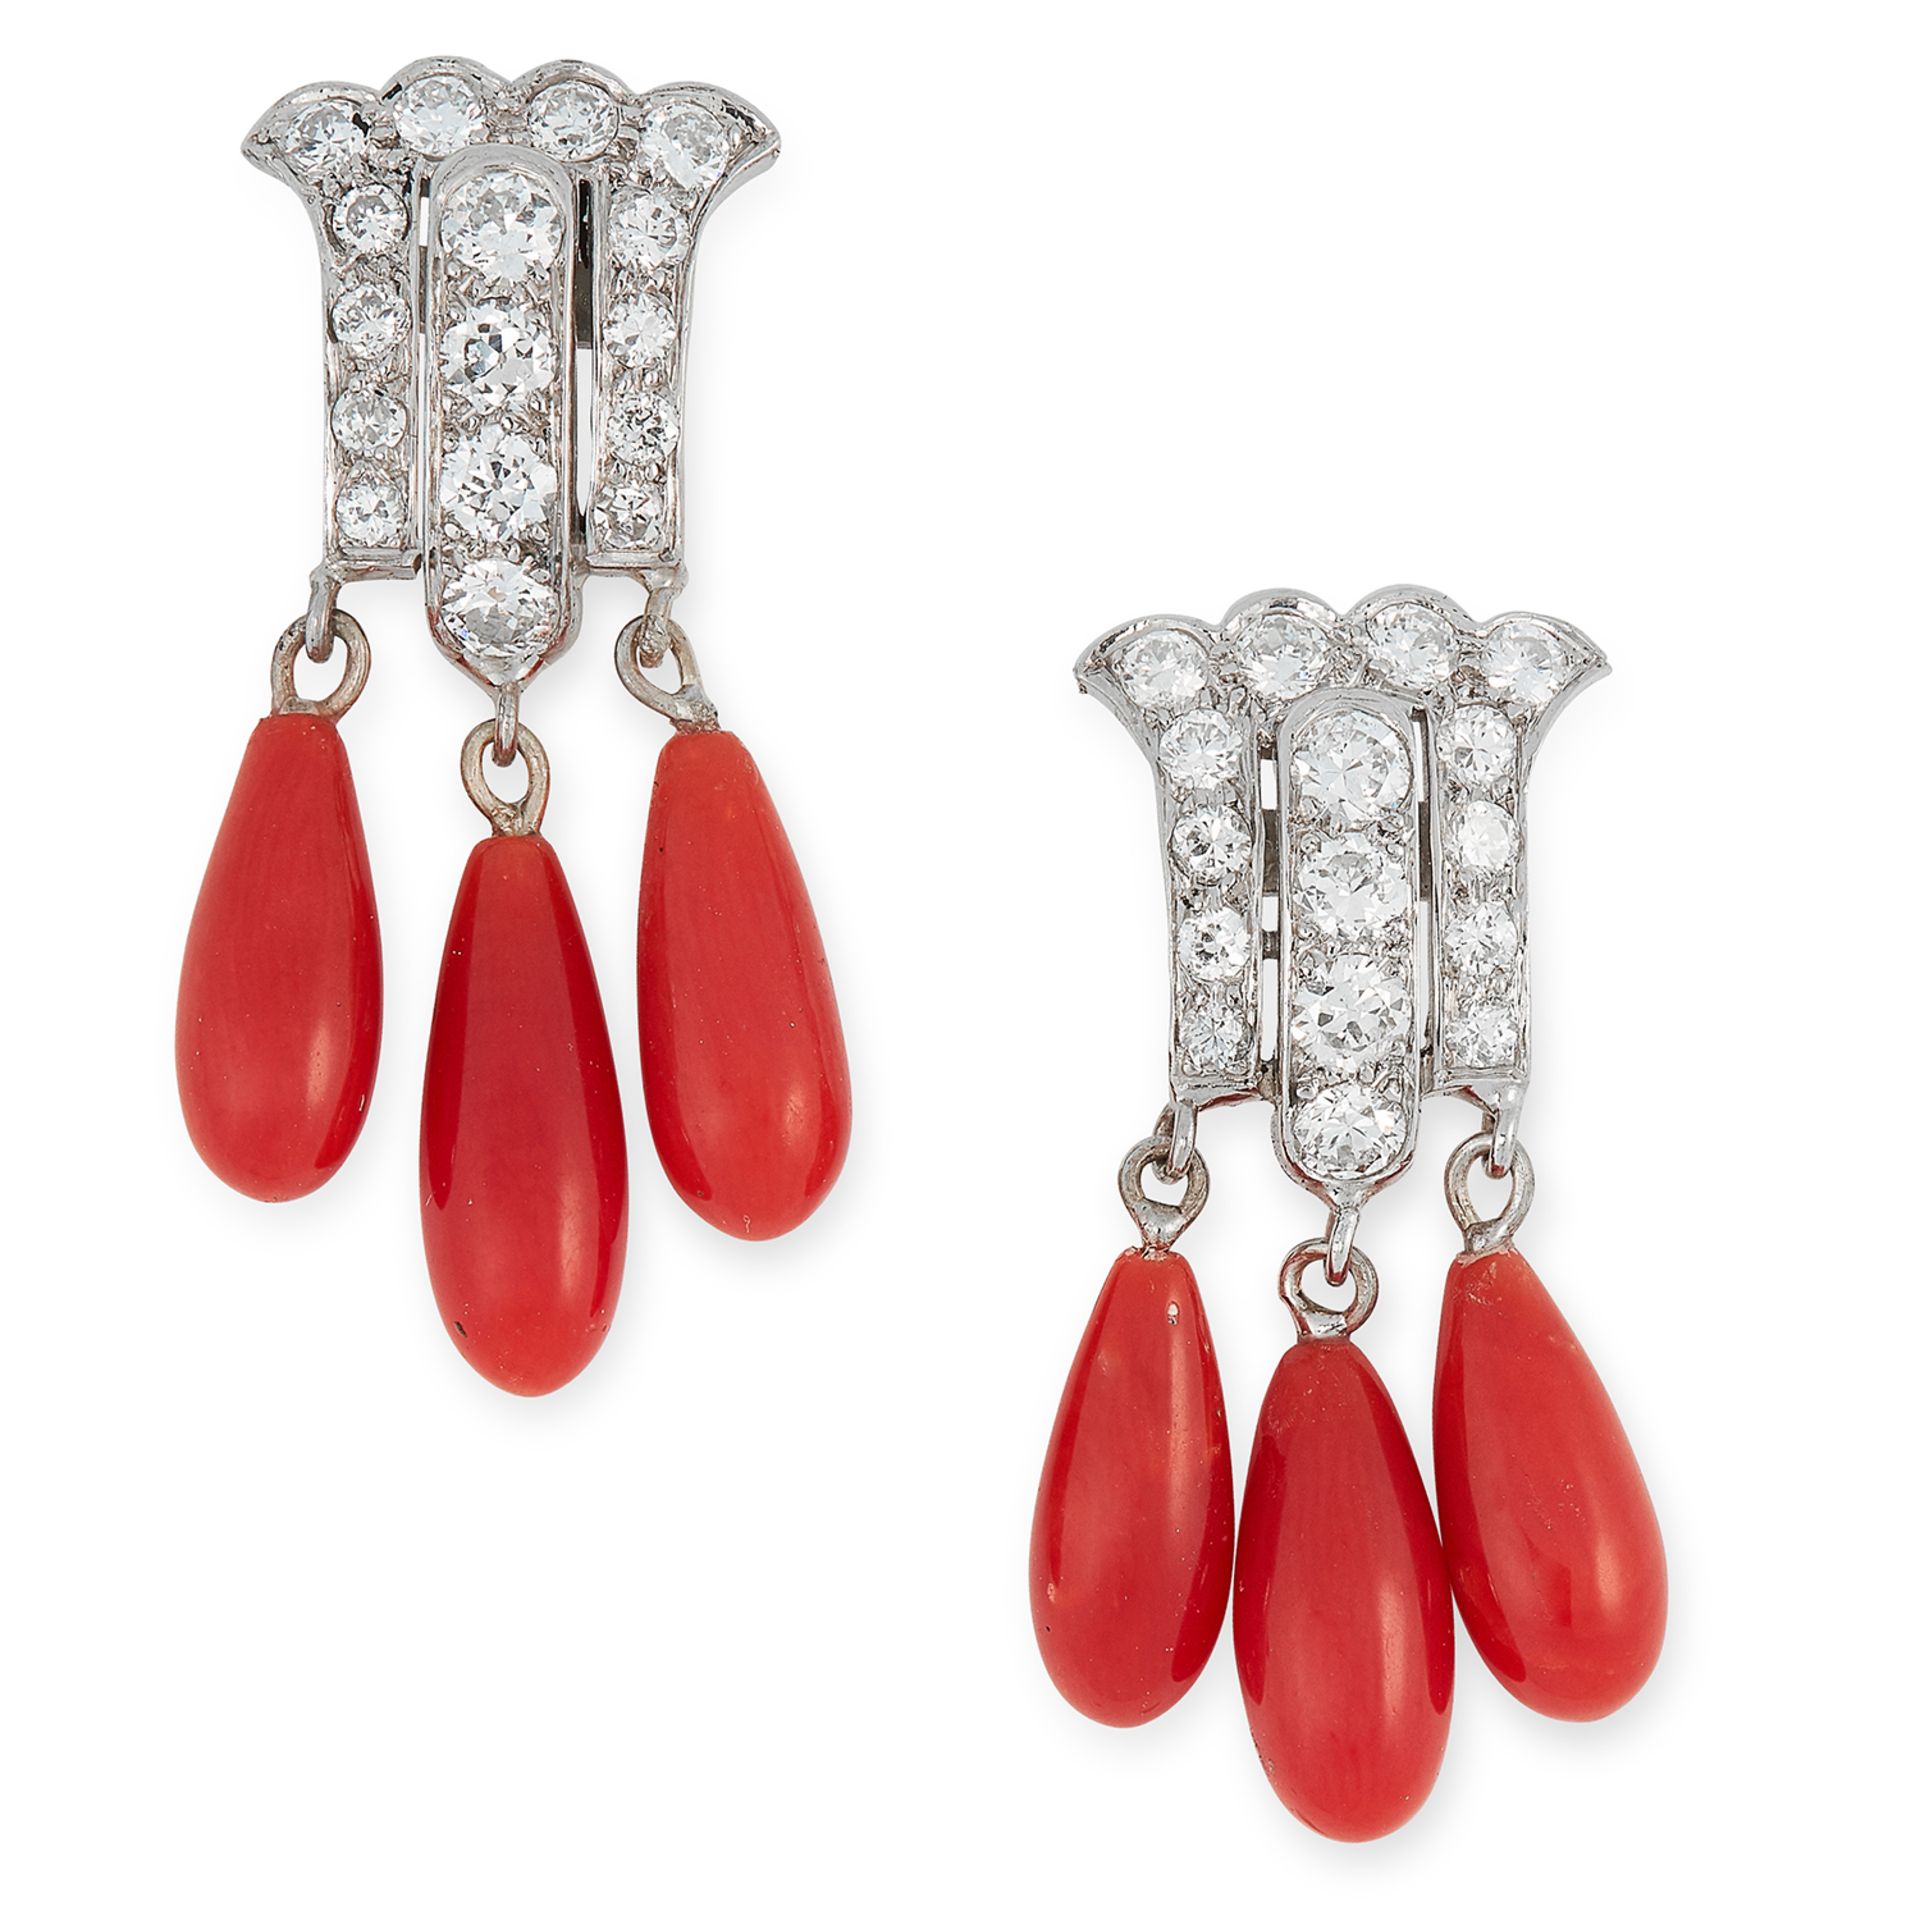 CORAL AND DIAMOND EARRINGS in Art Deco design each set with round cut diamonds suspending three